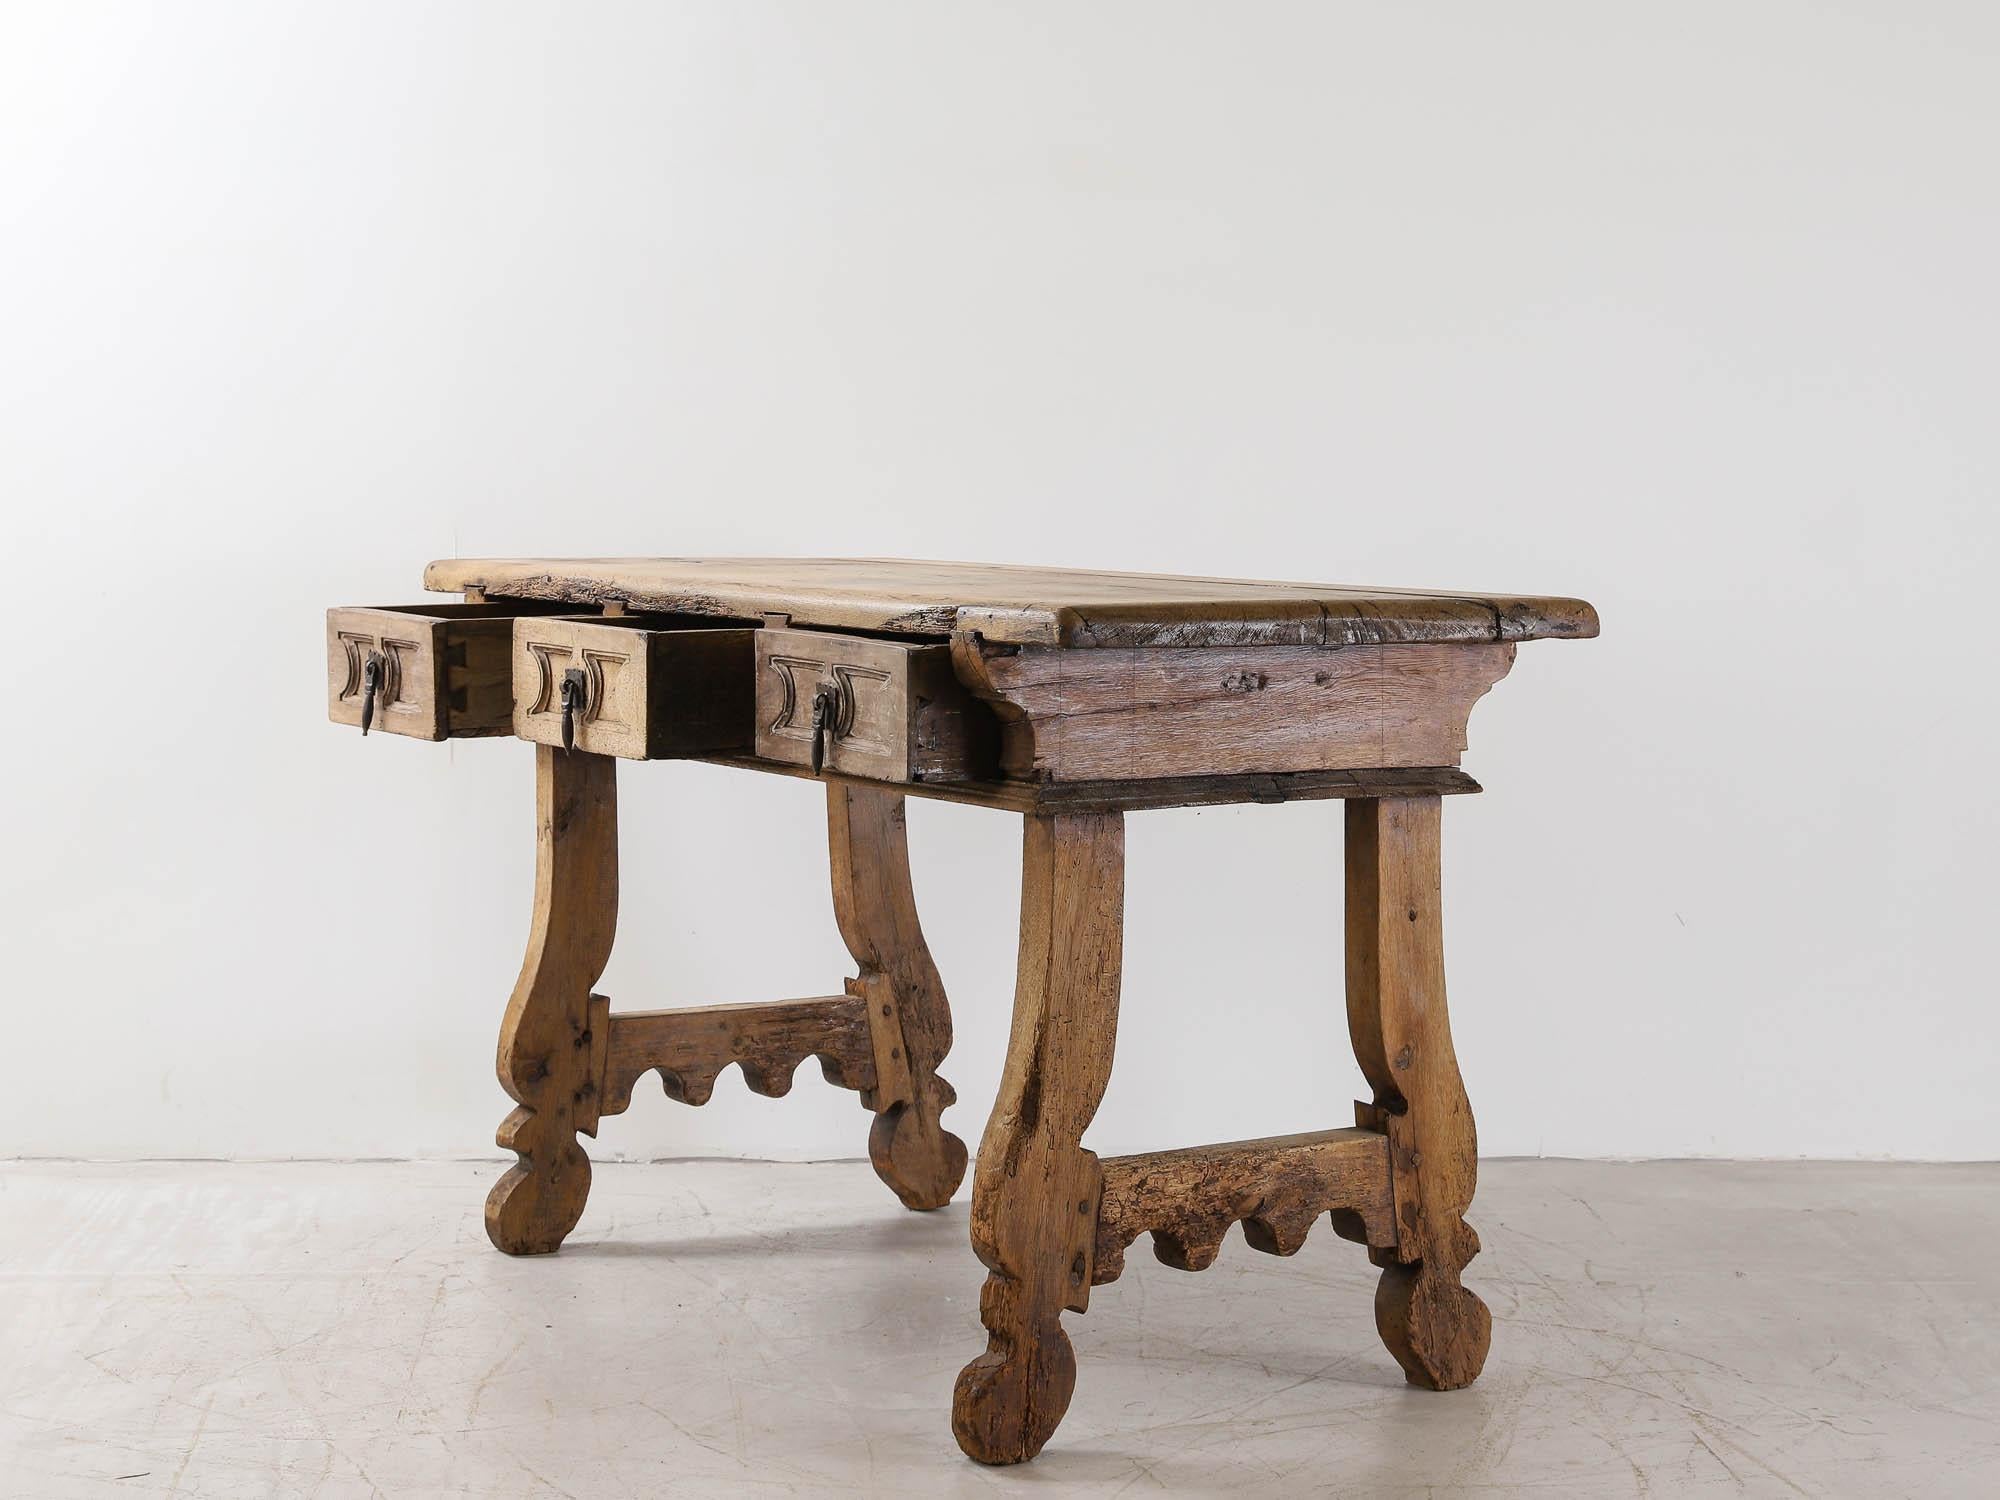 Spanish 18th Century Carved Walnut Table In Good Condition For Sale In London, Charterhouse Square